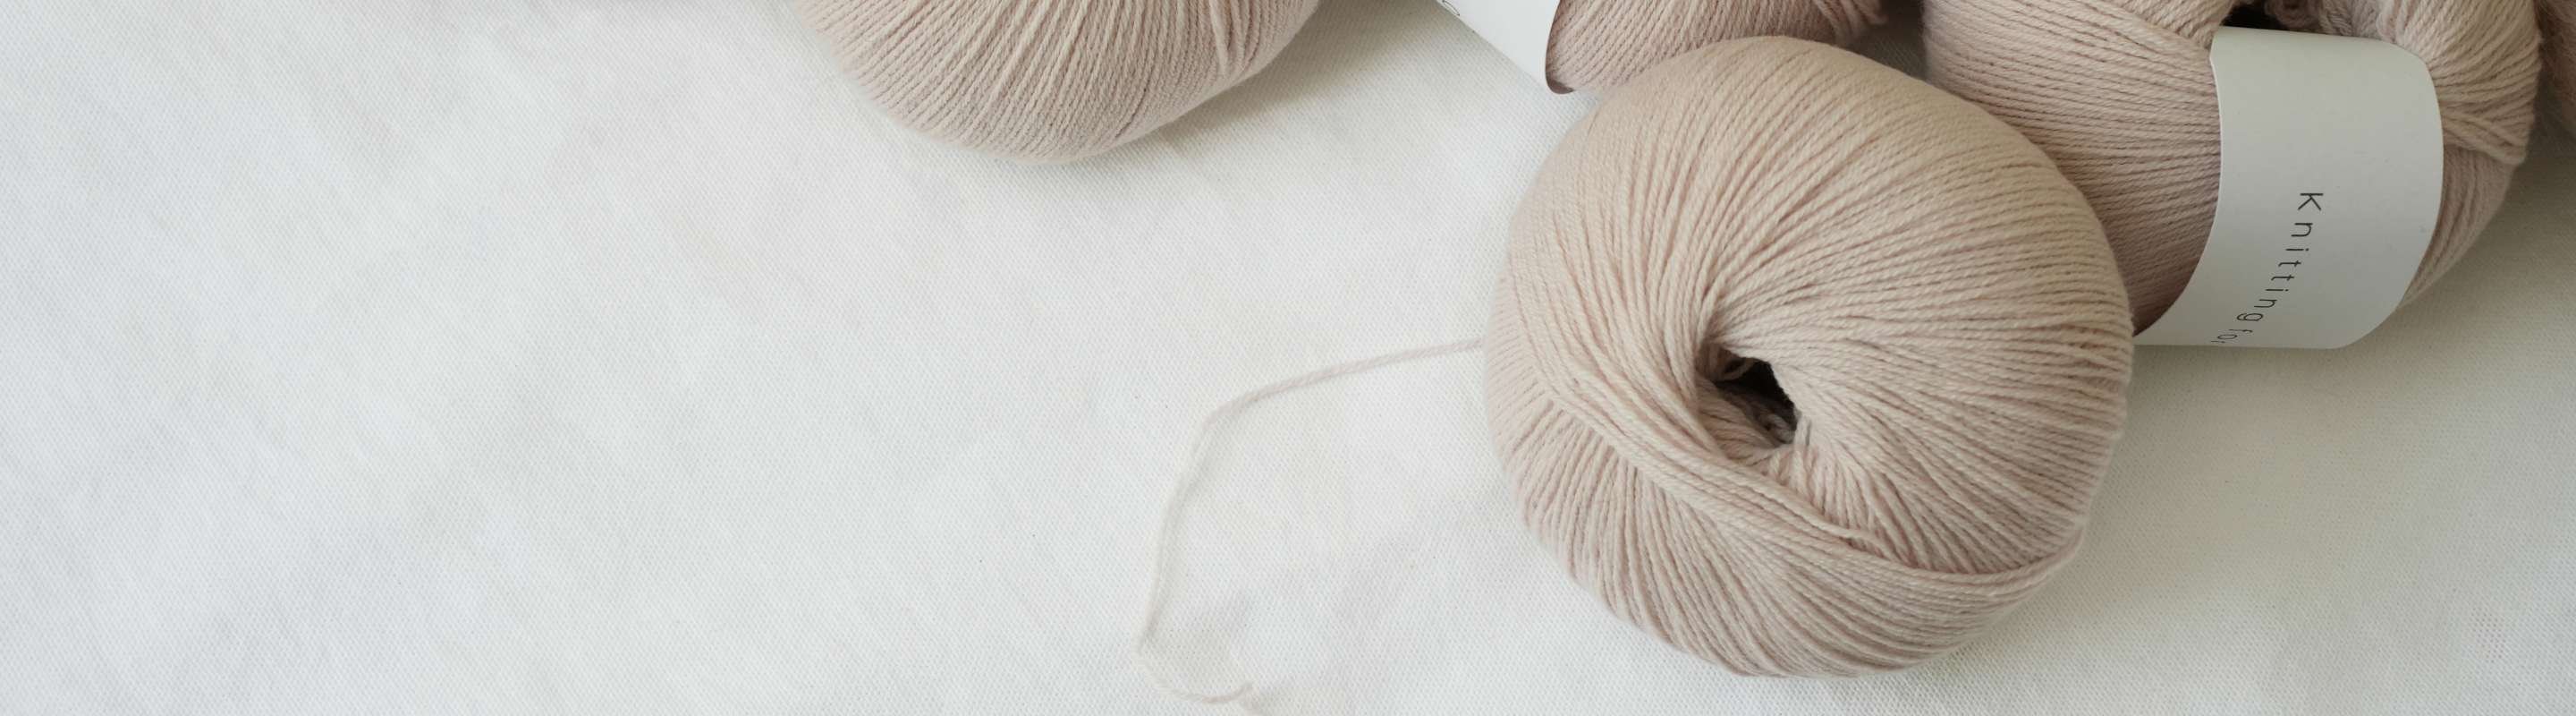 Yarn qualities for custom knit products